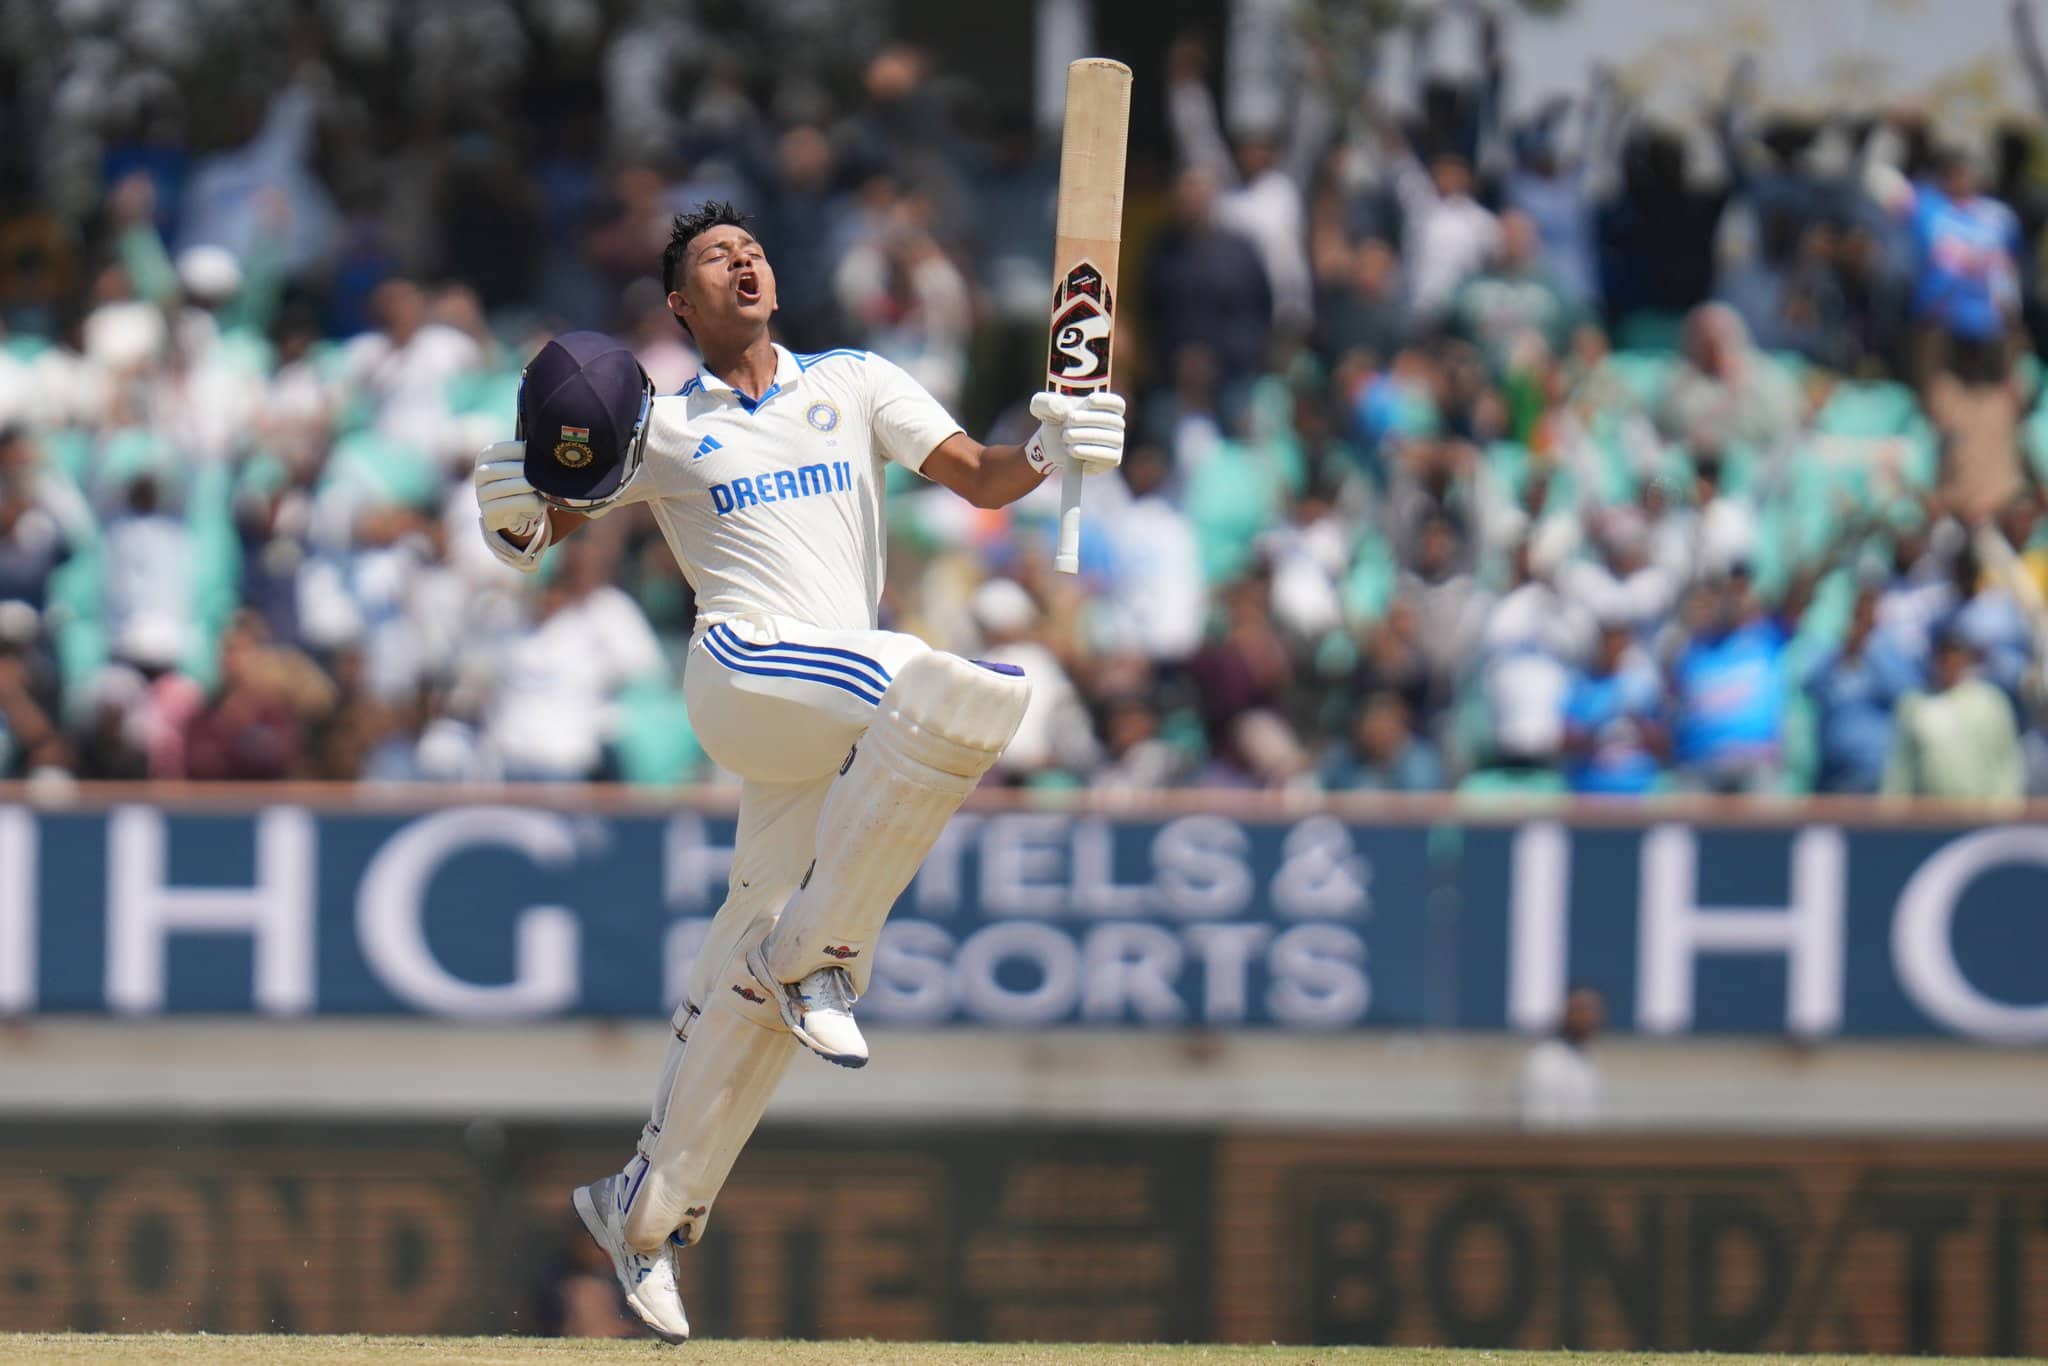 Jaiswal Sets His Eyes On Breaking Gavaskar's Five-Decade-Old Record In IND vs ENG Tests